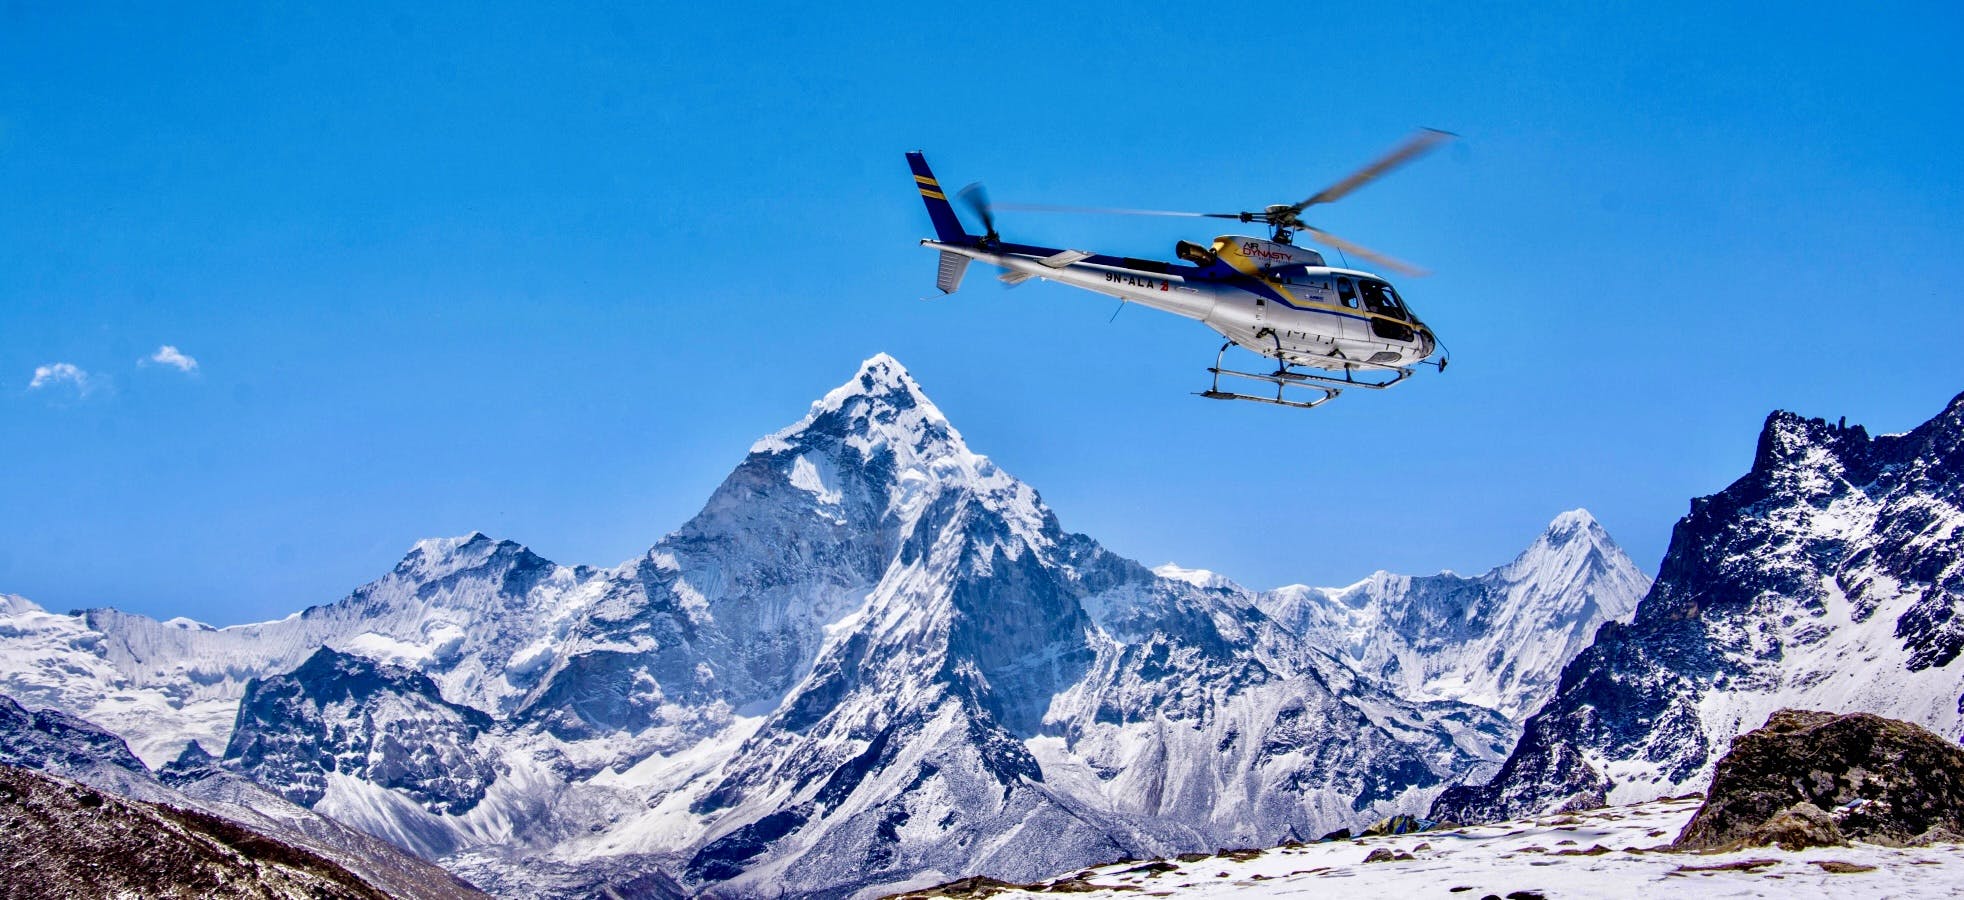 Refund and Cancellation policy for Everest Helicopter Tour